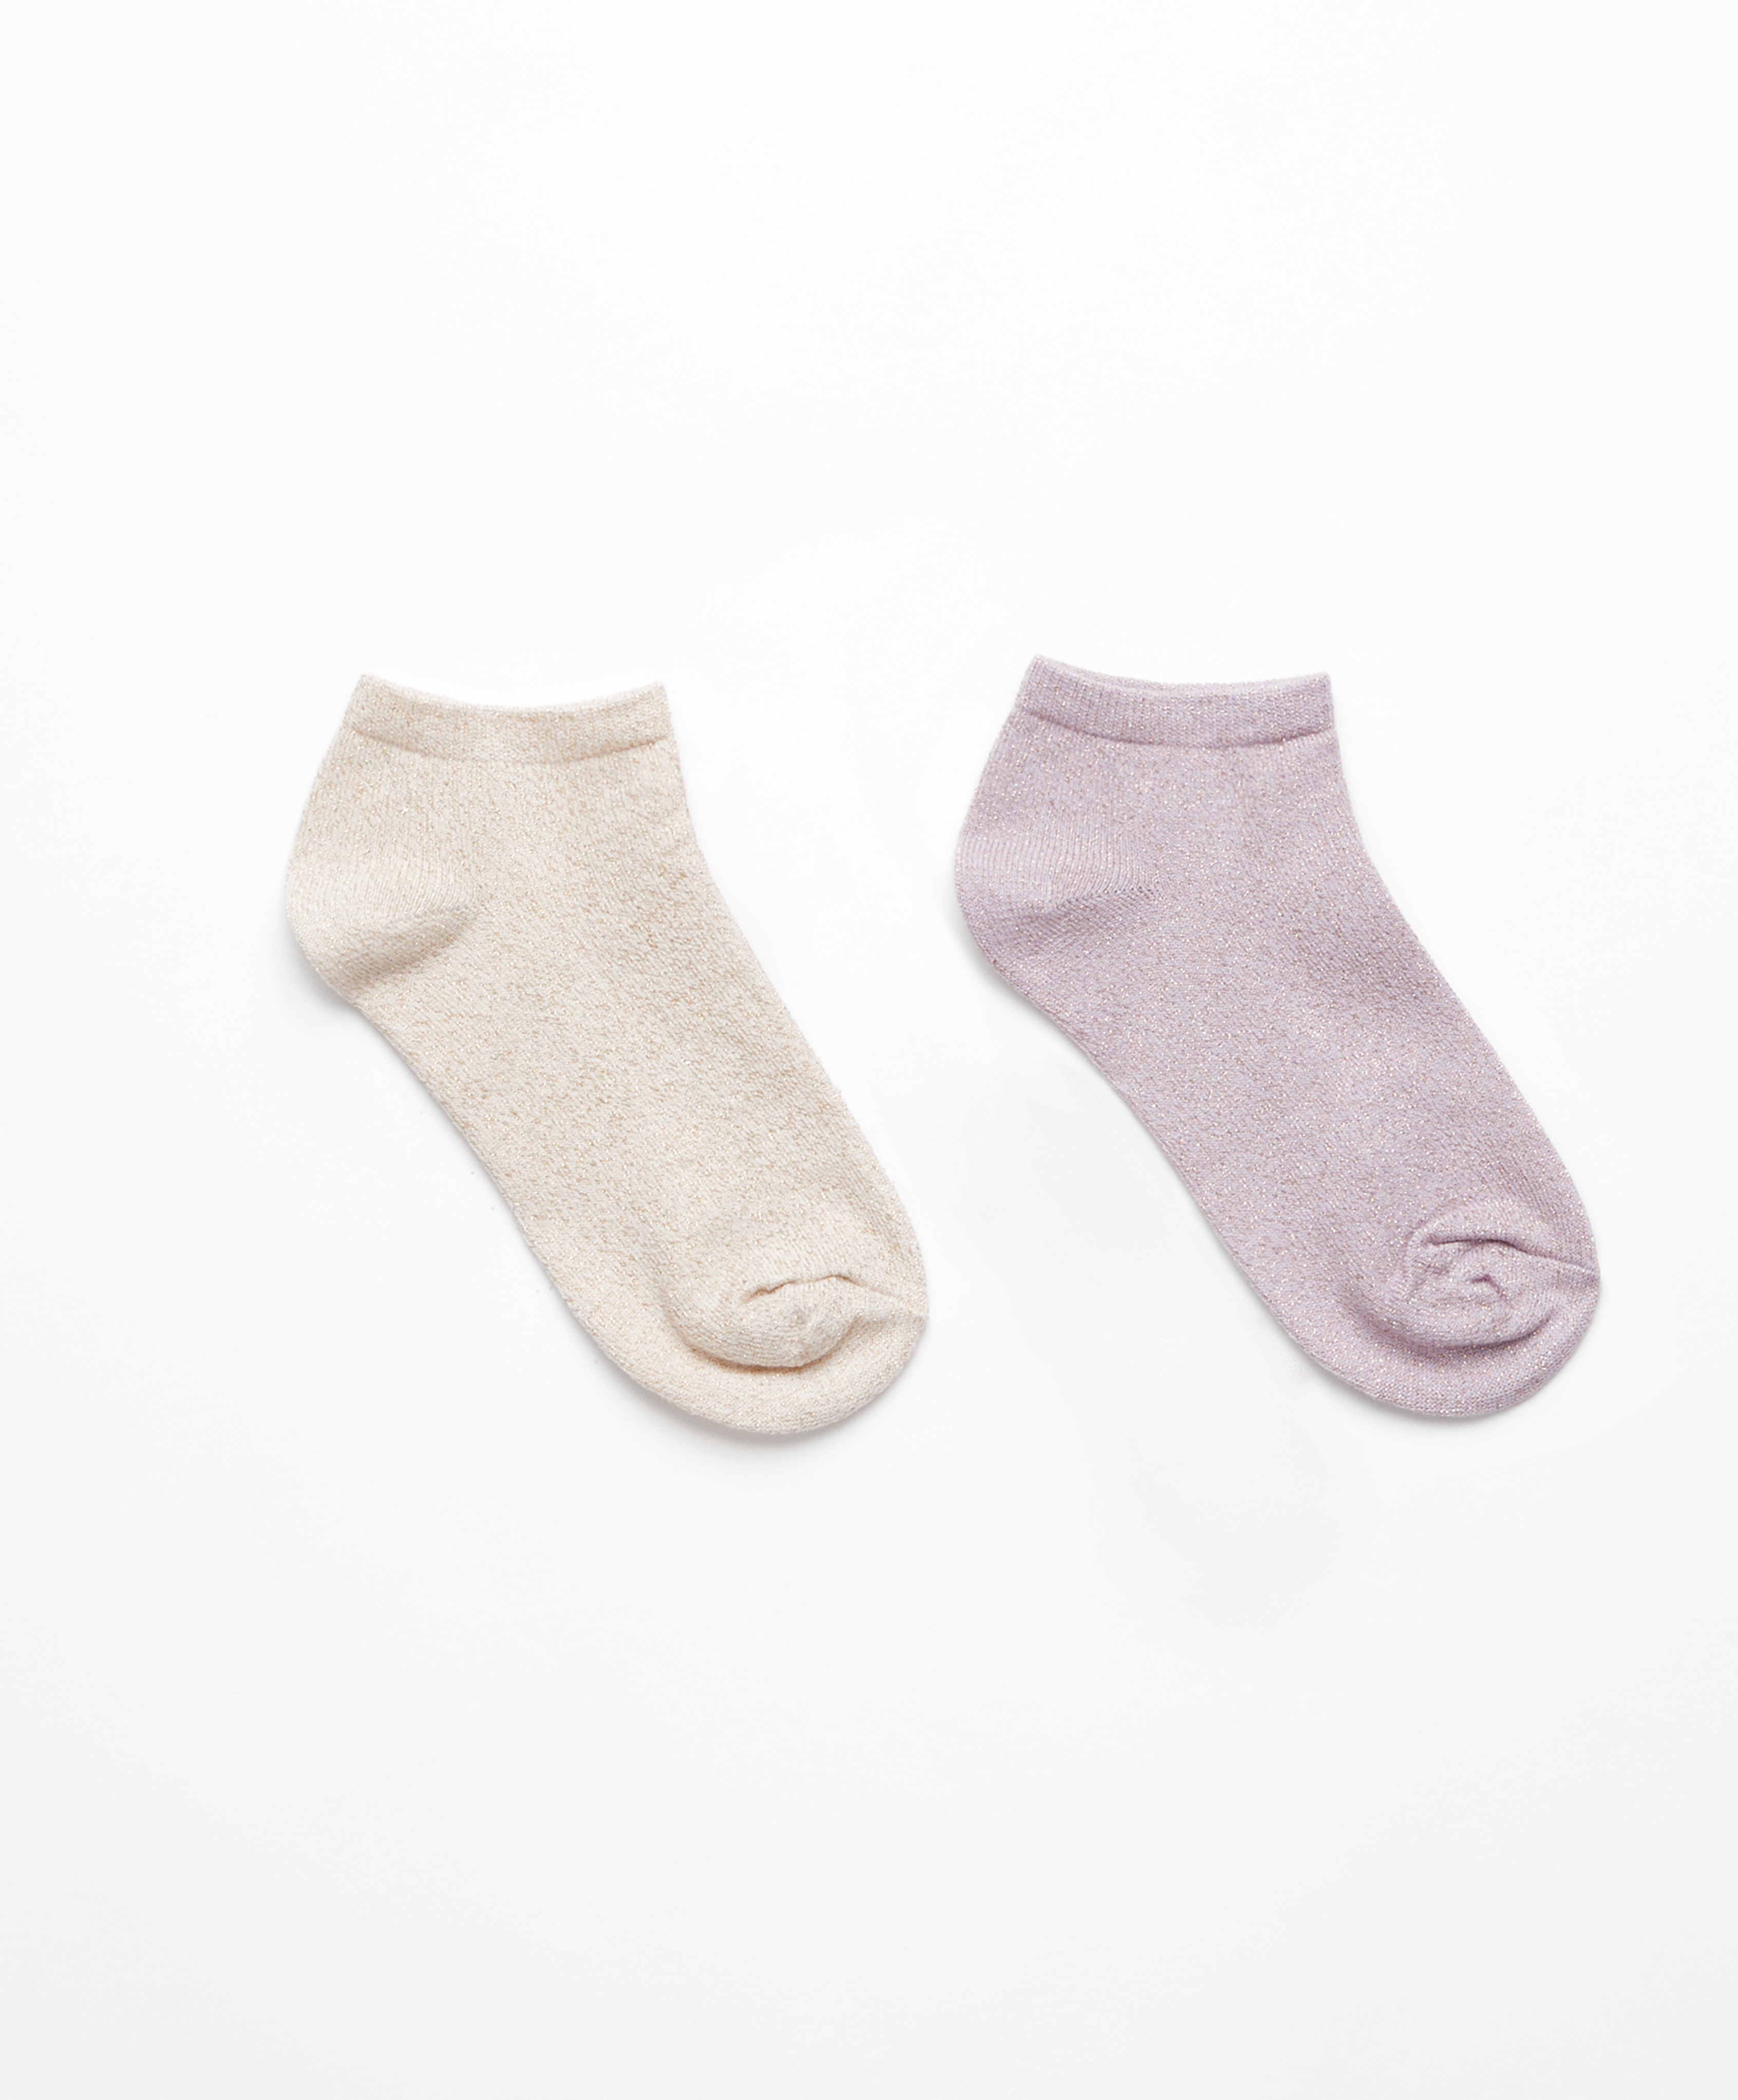 2 pairs of sneaker socks in cotton with metallic thread